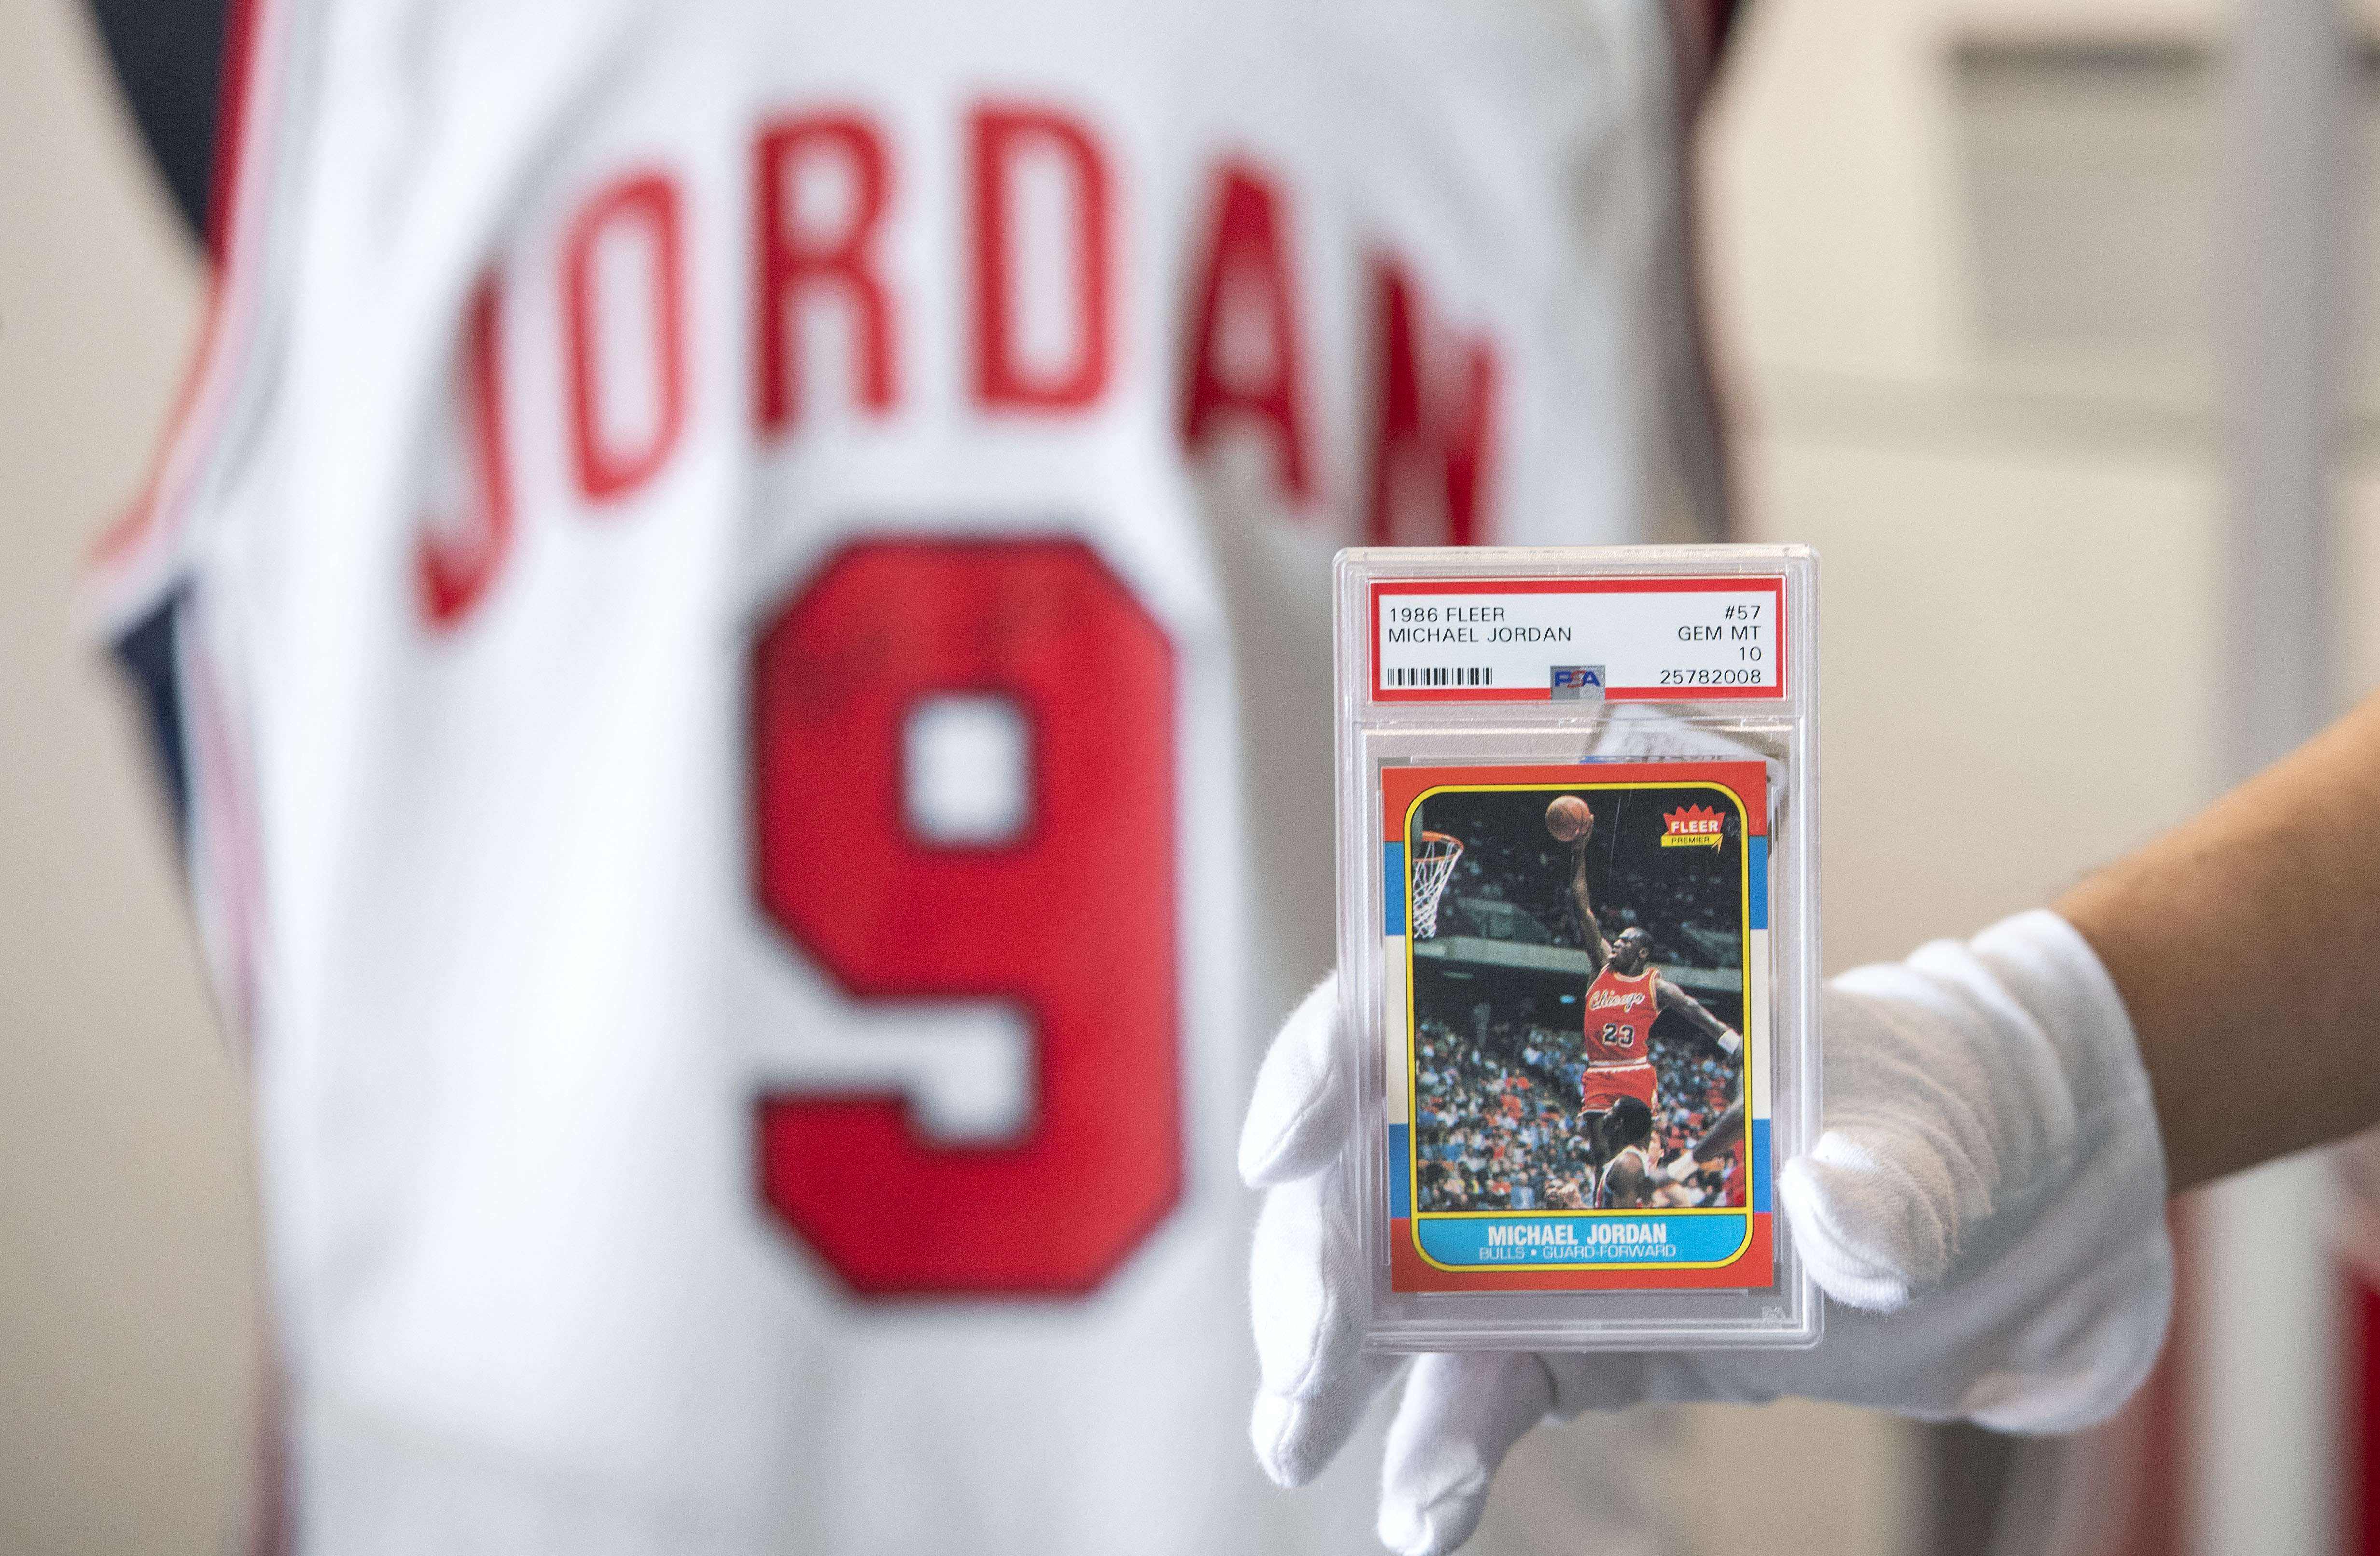 Jordan's Rookie Card To Be Auctioned Off - CBS Chicago